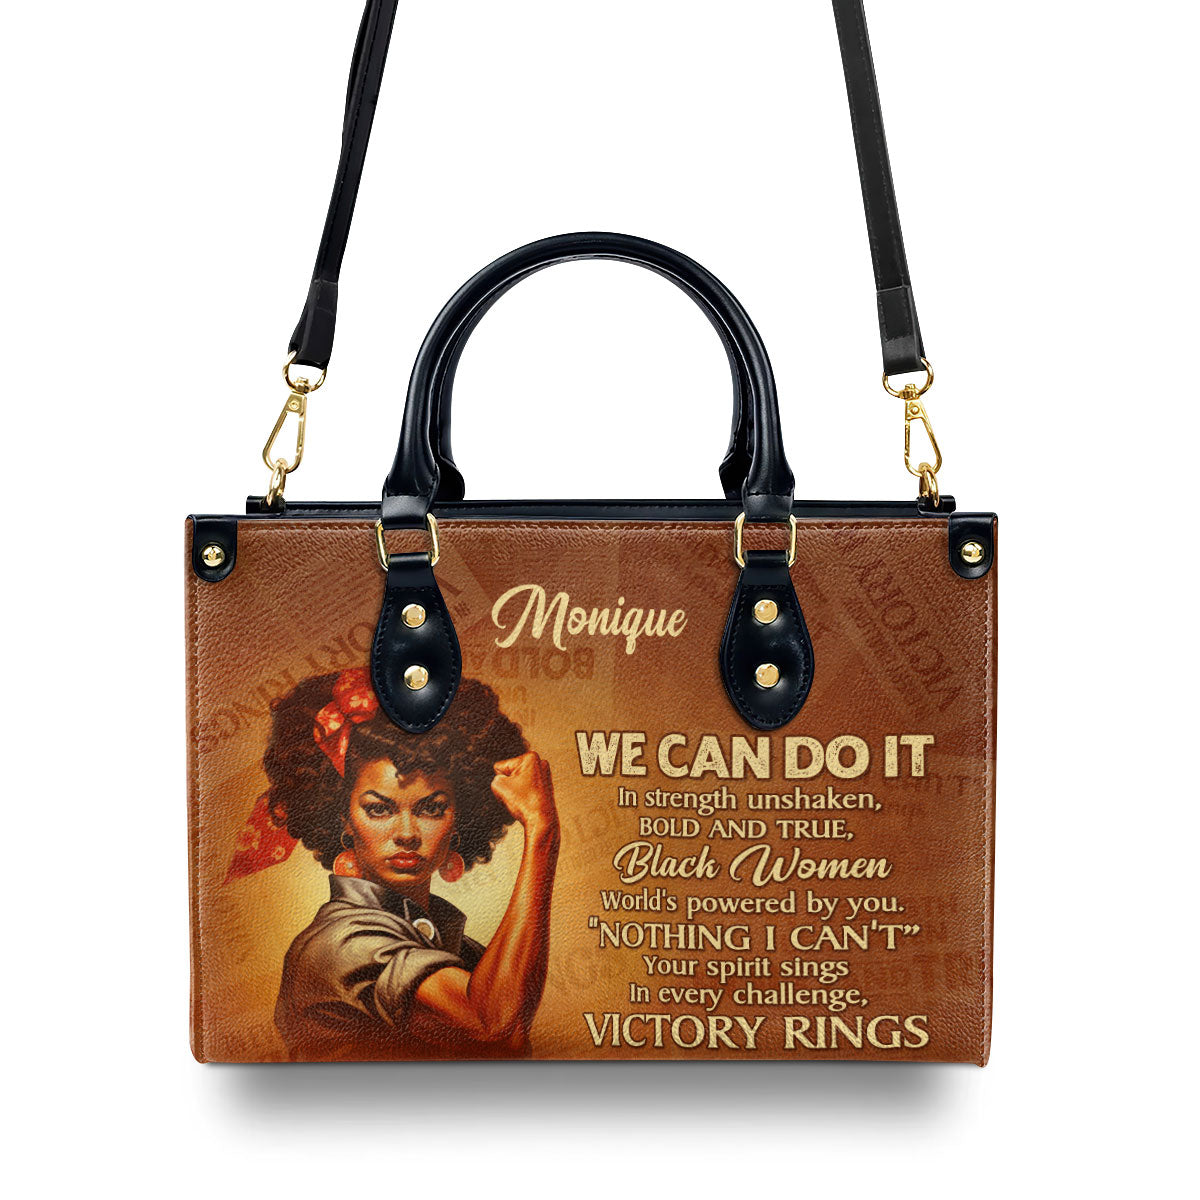 We Can Do it - Personalized Leather Handbag STB163